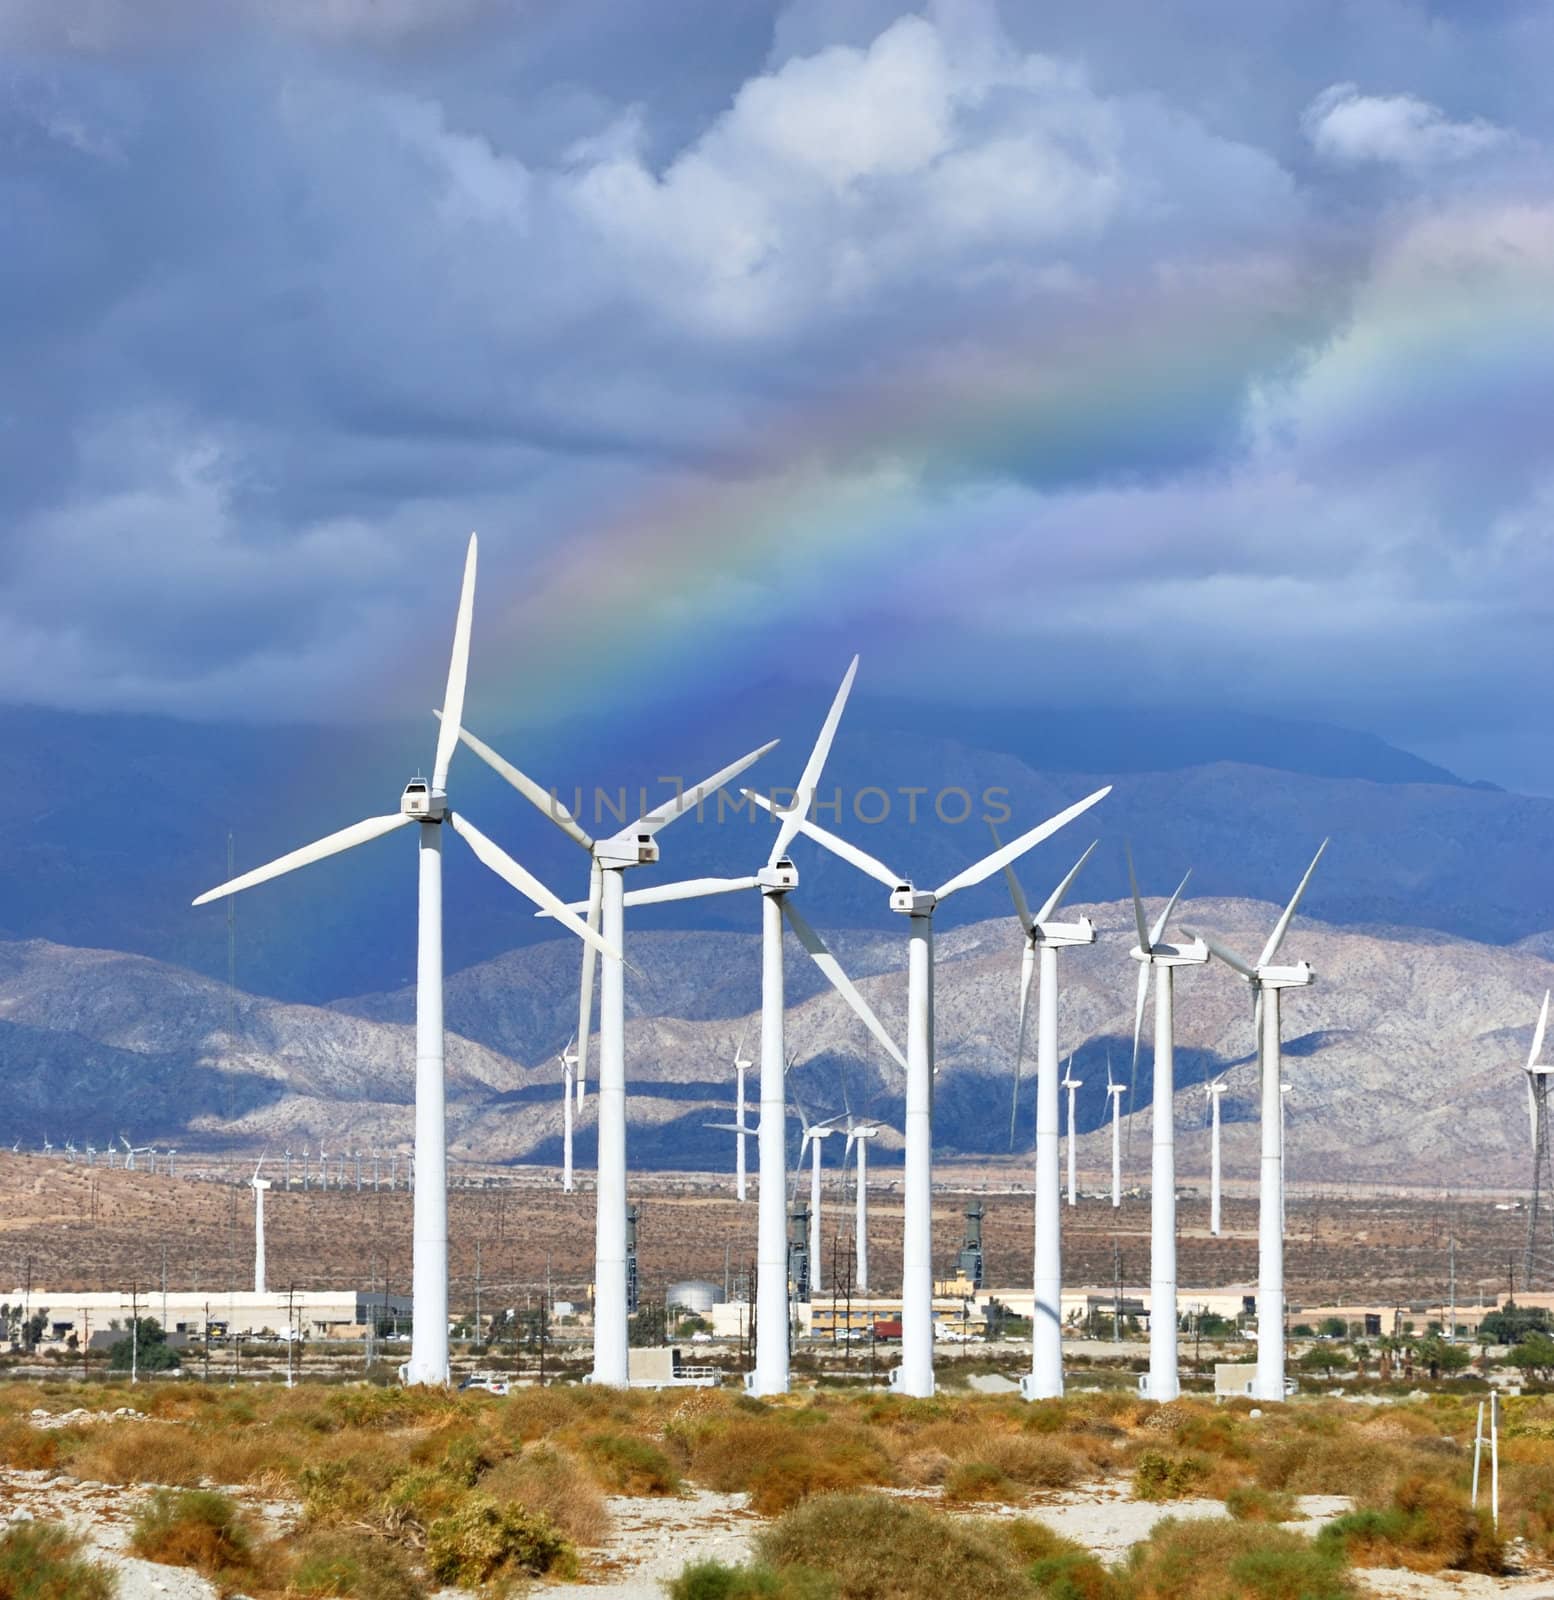 Windmills rotating and producing clean energy, electric power.